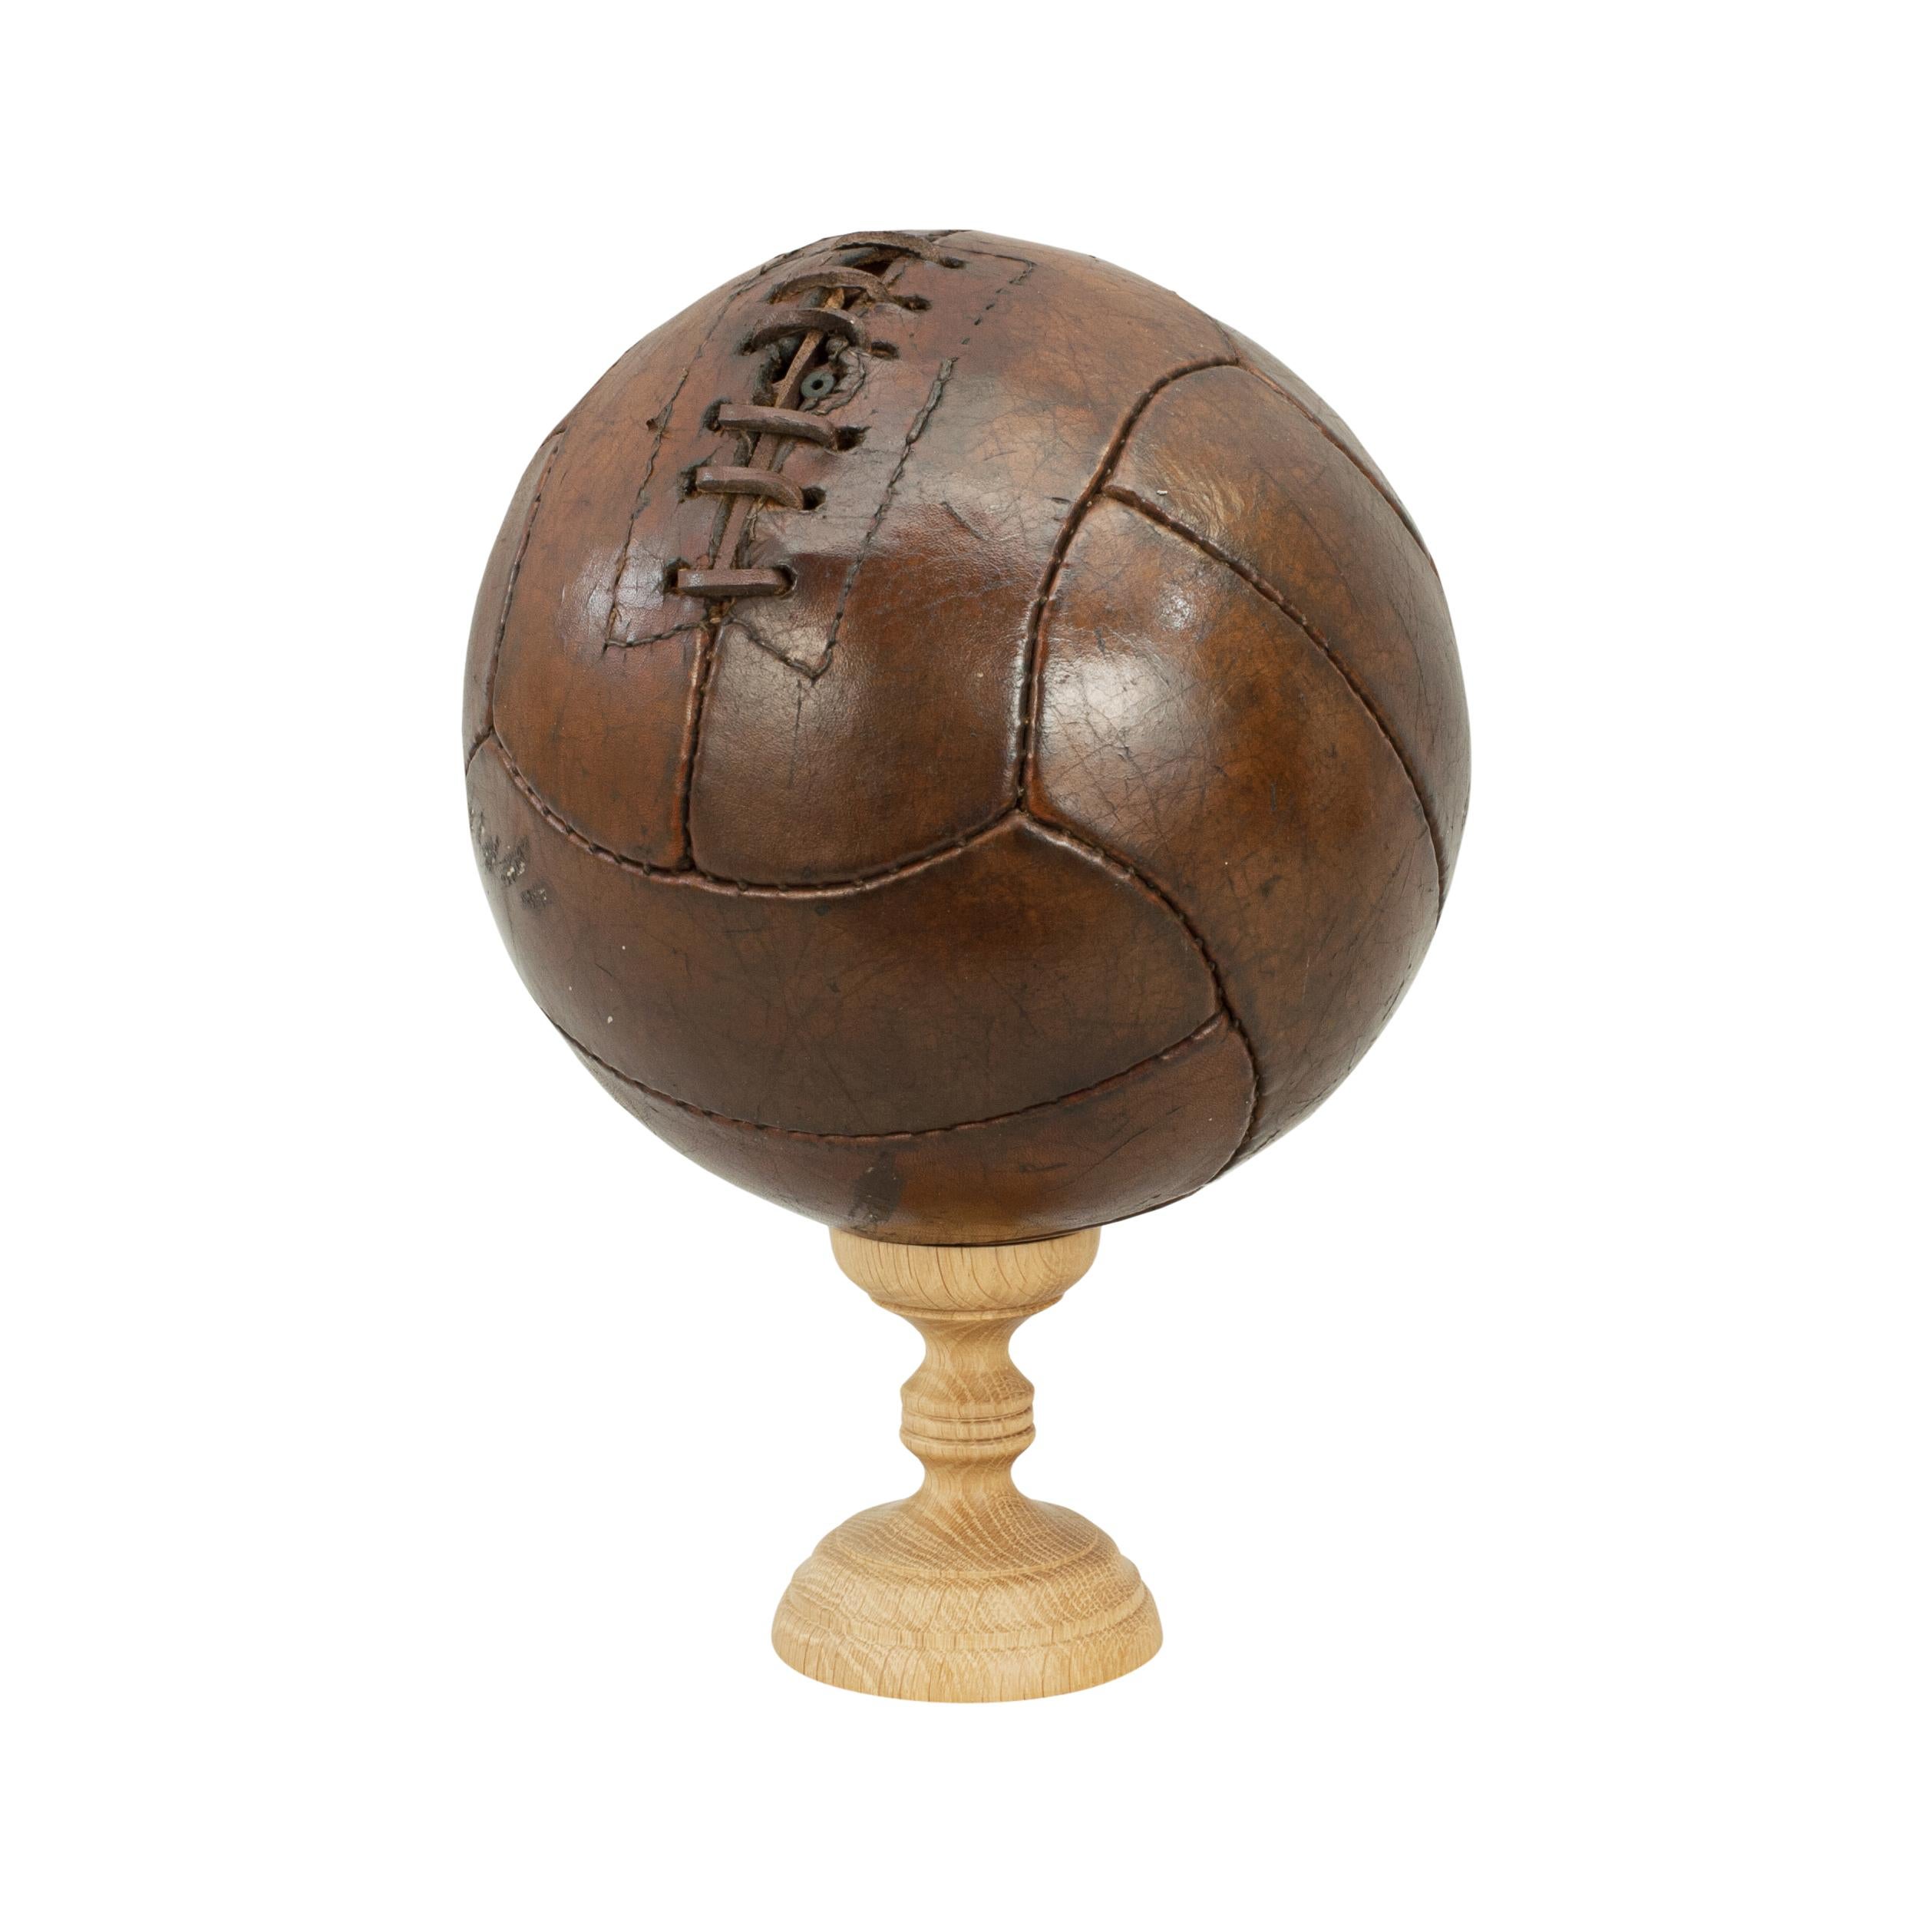 Vintage leather football.
A traditional 12-panel leather football in good condition. The ball has a lace-up slit to the top to enable bladder inflation.
  